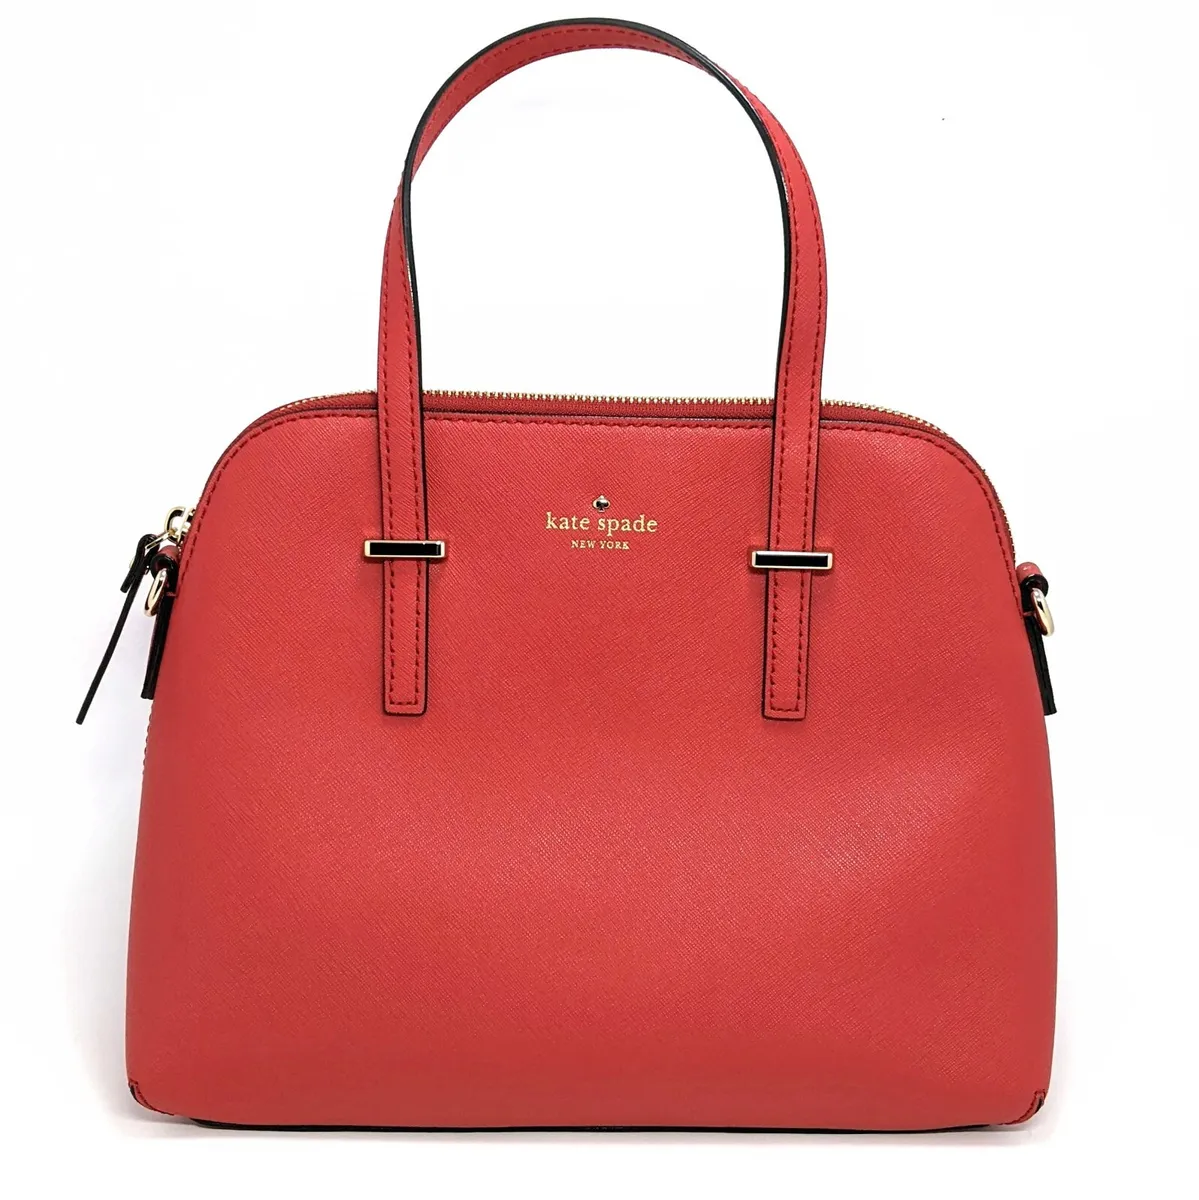 kate spade | Bags | Kate Spade Crossbody Red Tote 3 Compartments With  Center Zip Excellent Cond | Poshmark